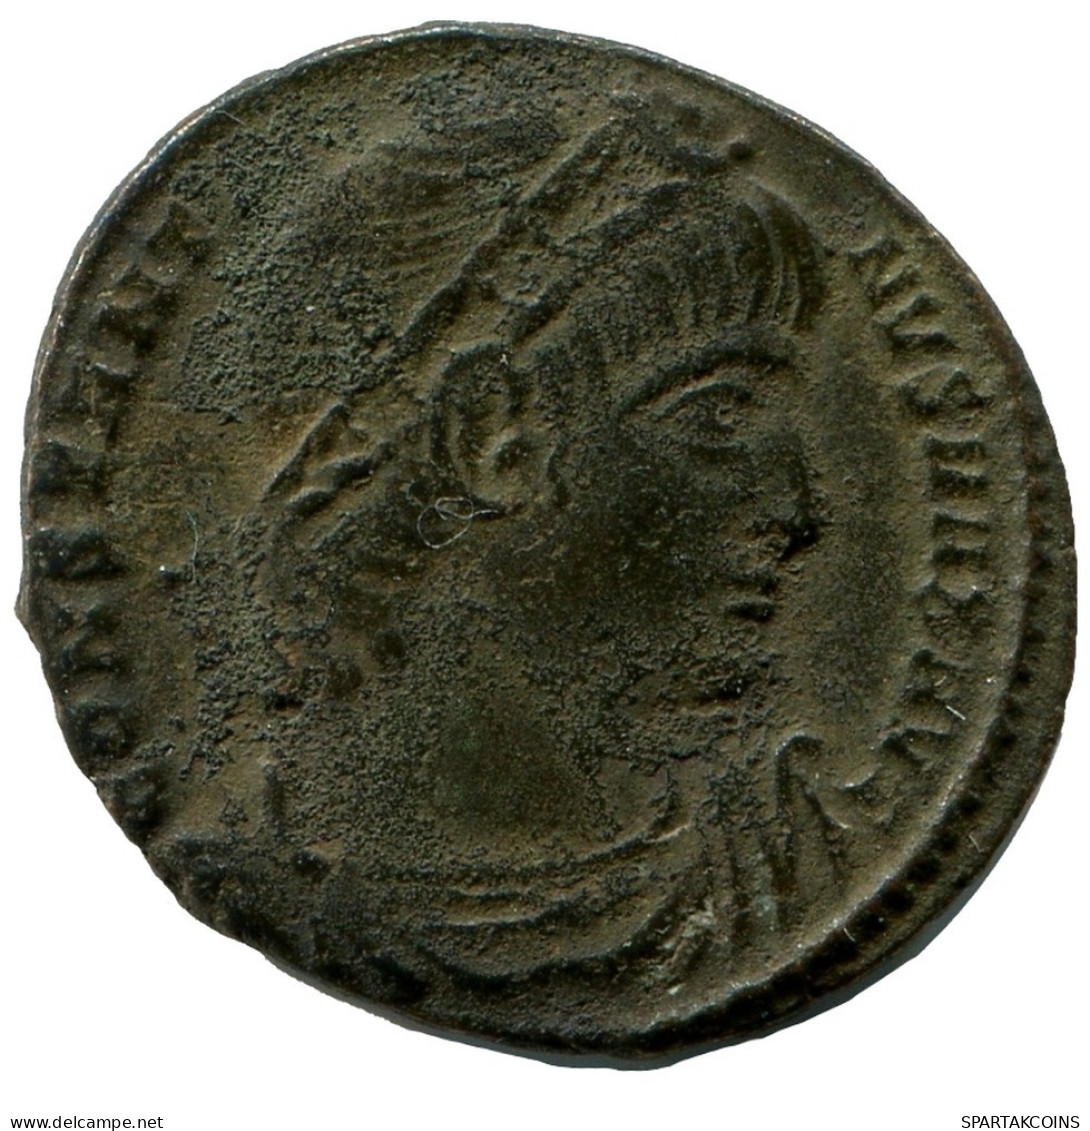 CONSTANTINE I MINTED IN CONSTANTINOPLE FOUND IN IHNASYAH HOARD #ANC10764.14.D.A - L'Empire Chrétien (307 à 363)